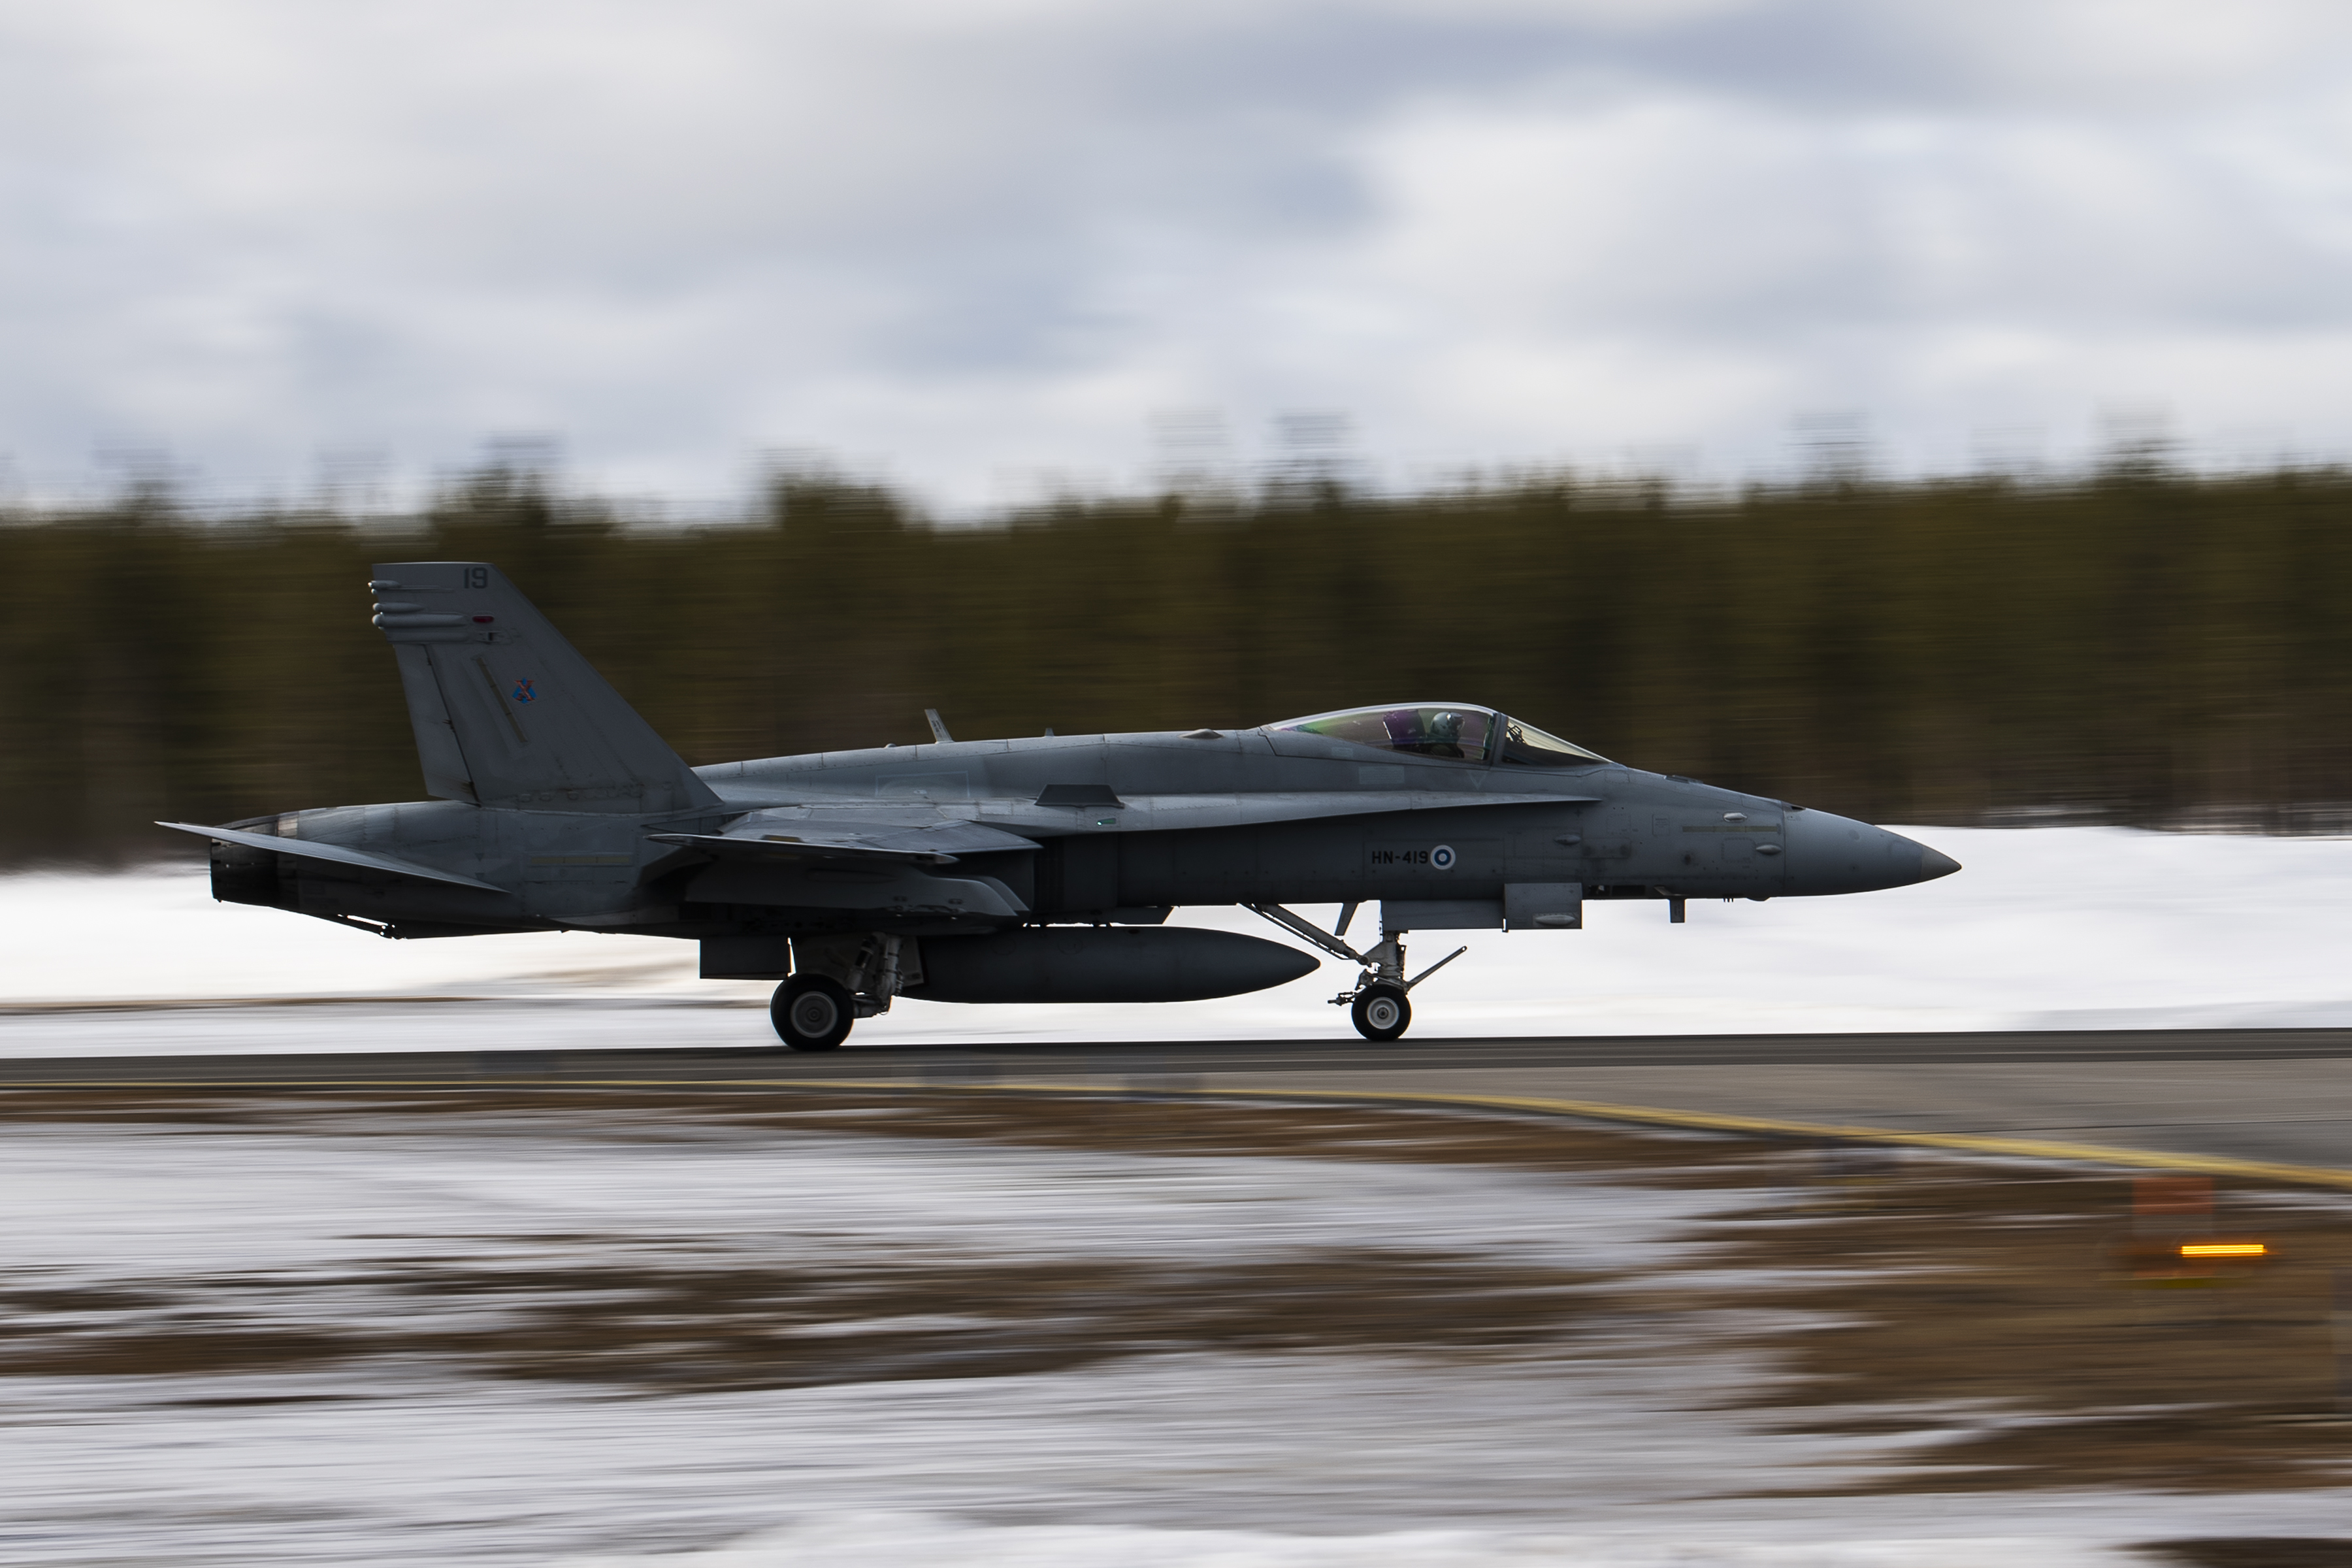 A Finnish F-18 Hornet departs from Jokkmokk Air Base during a joint exercise between the air forces of Finland and Sweden over the Arctic Circle towns of Jokkmokk in Sweden and Rovaniemi in Finland on March 25, 2019. (Jonathan Nackstrand/AFP via Getty Images)